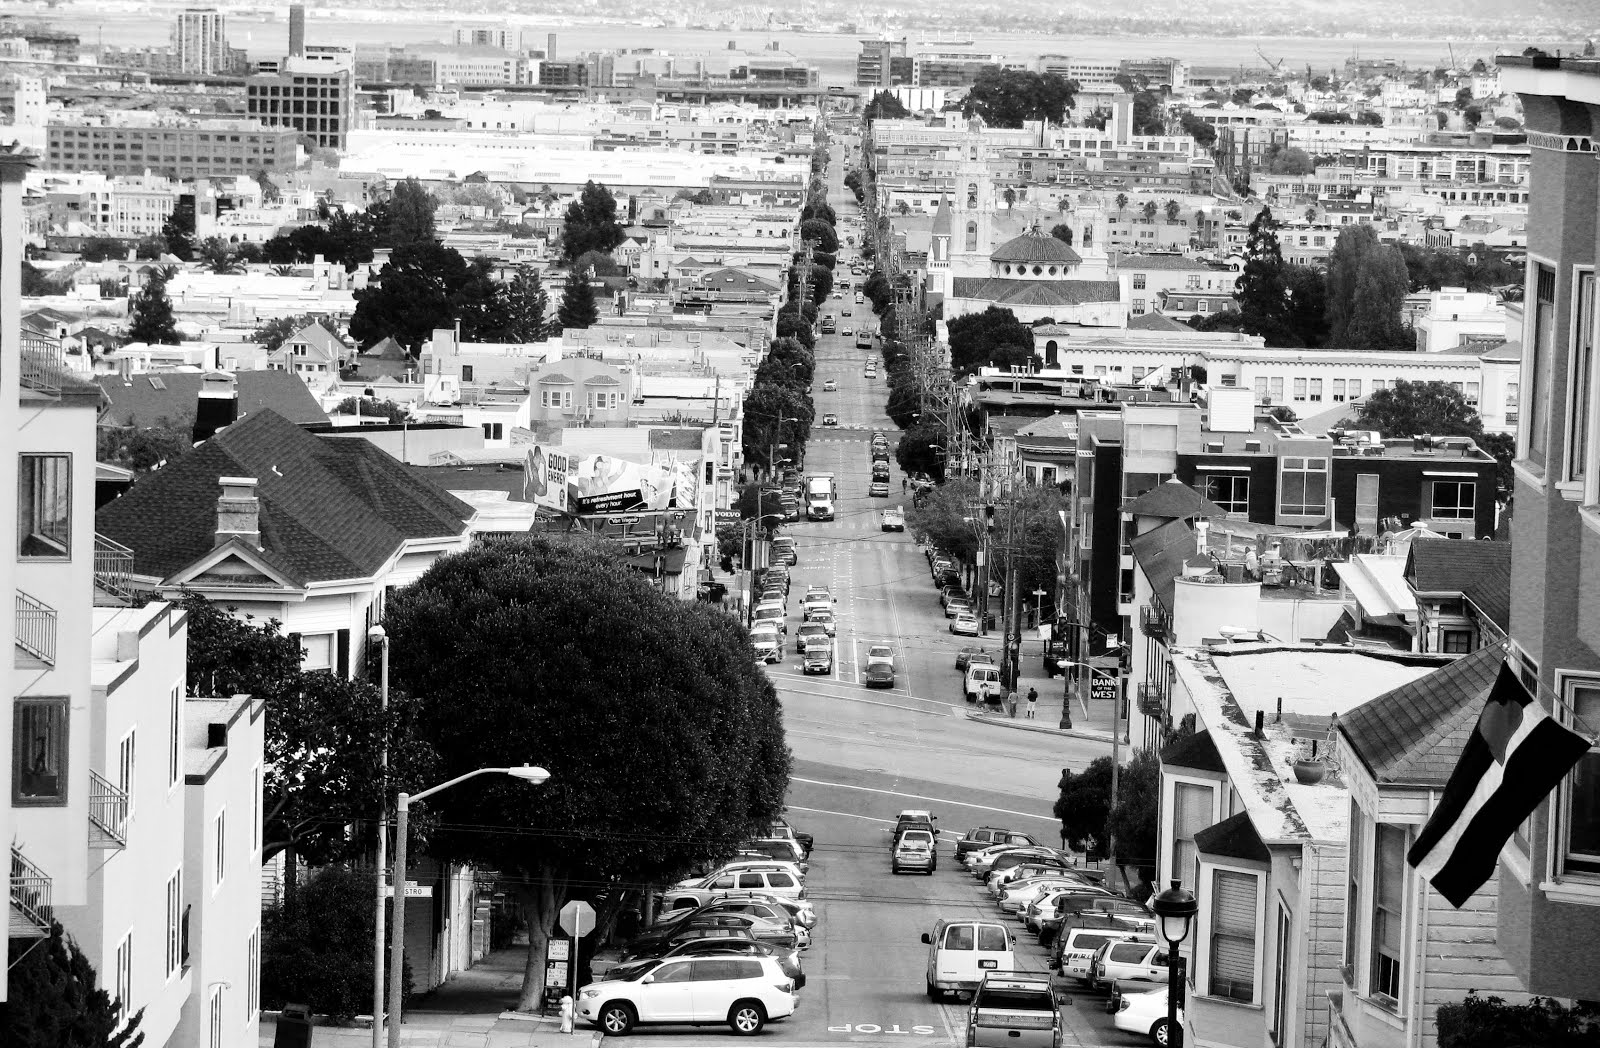 drive by shooting - looking down the mission